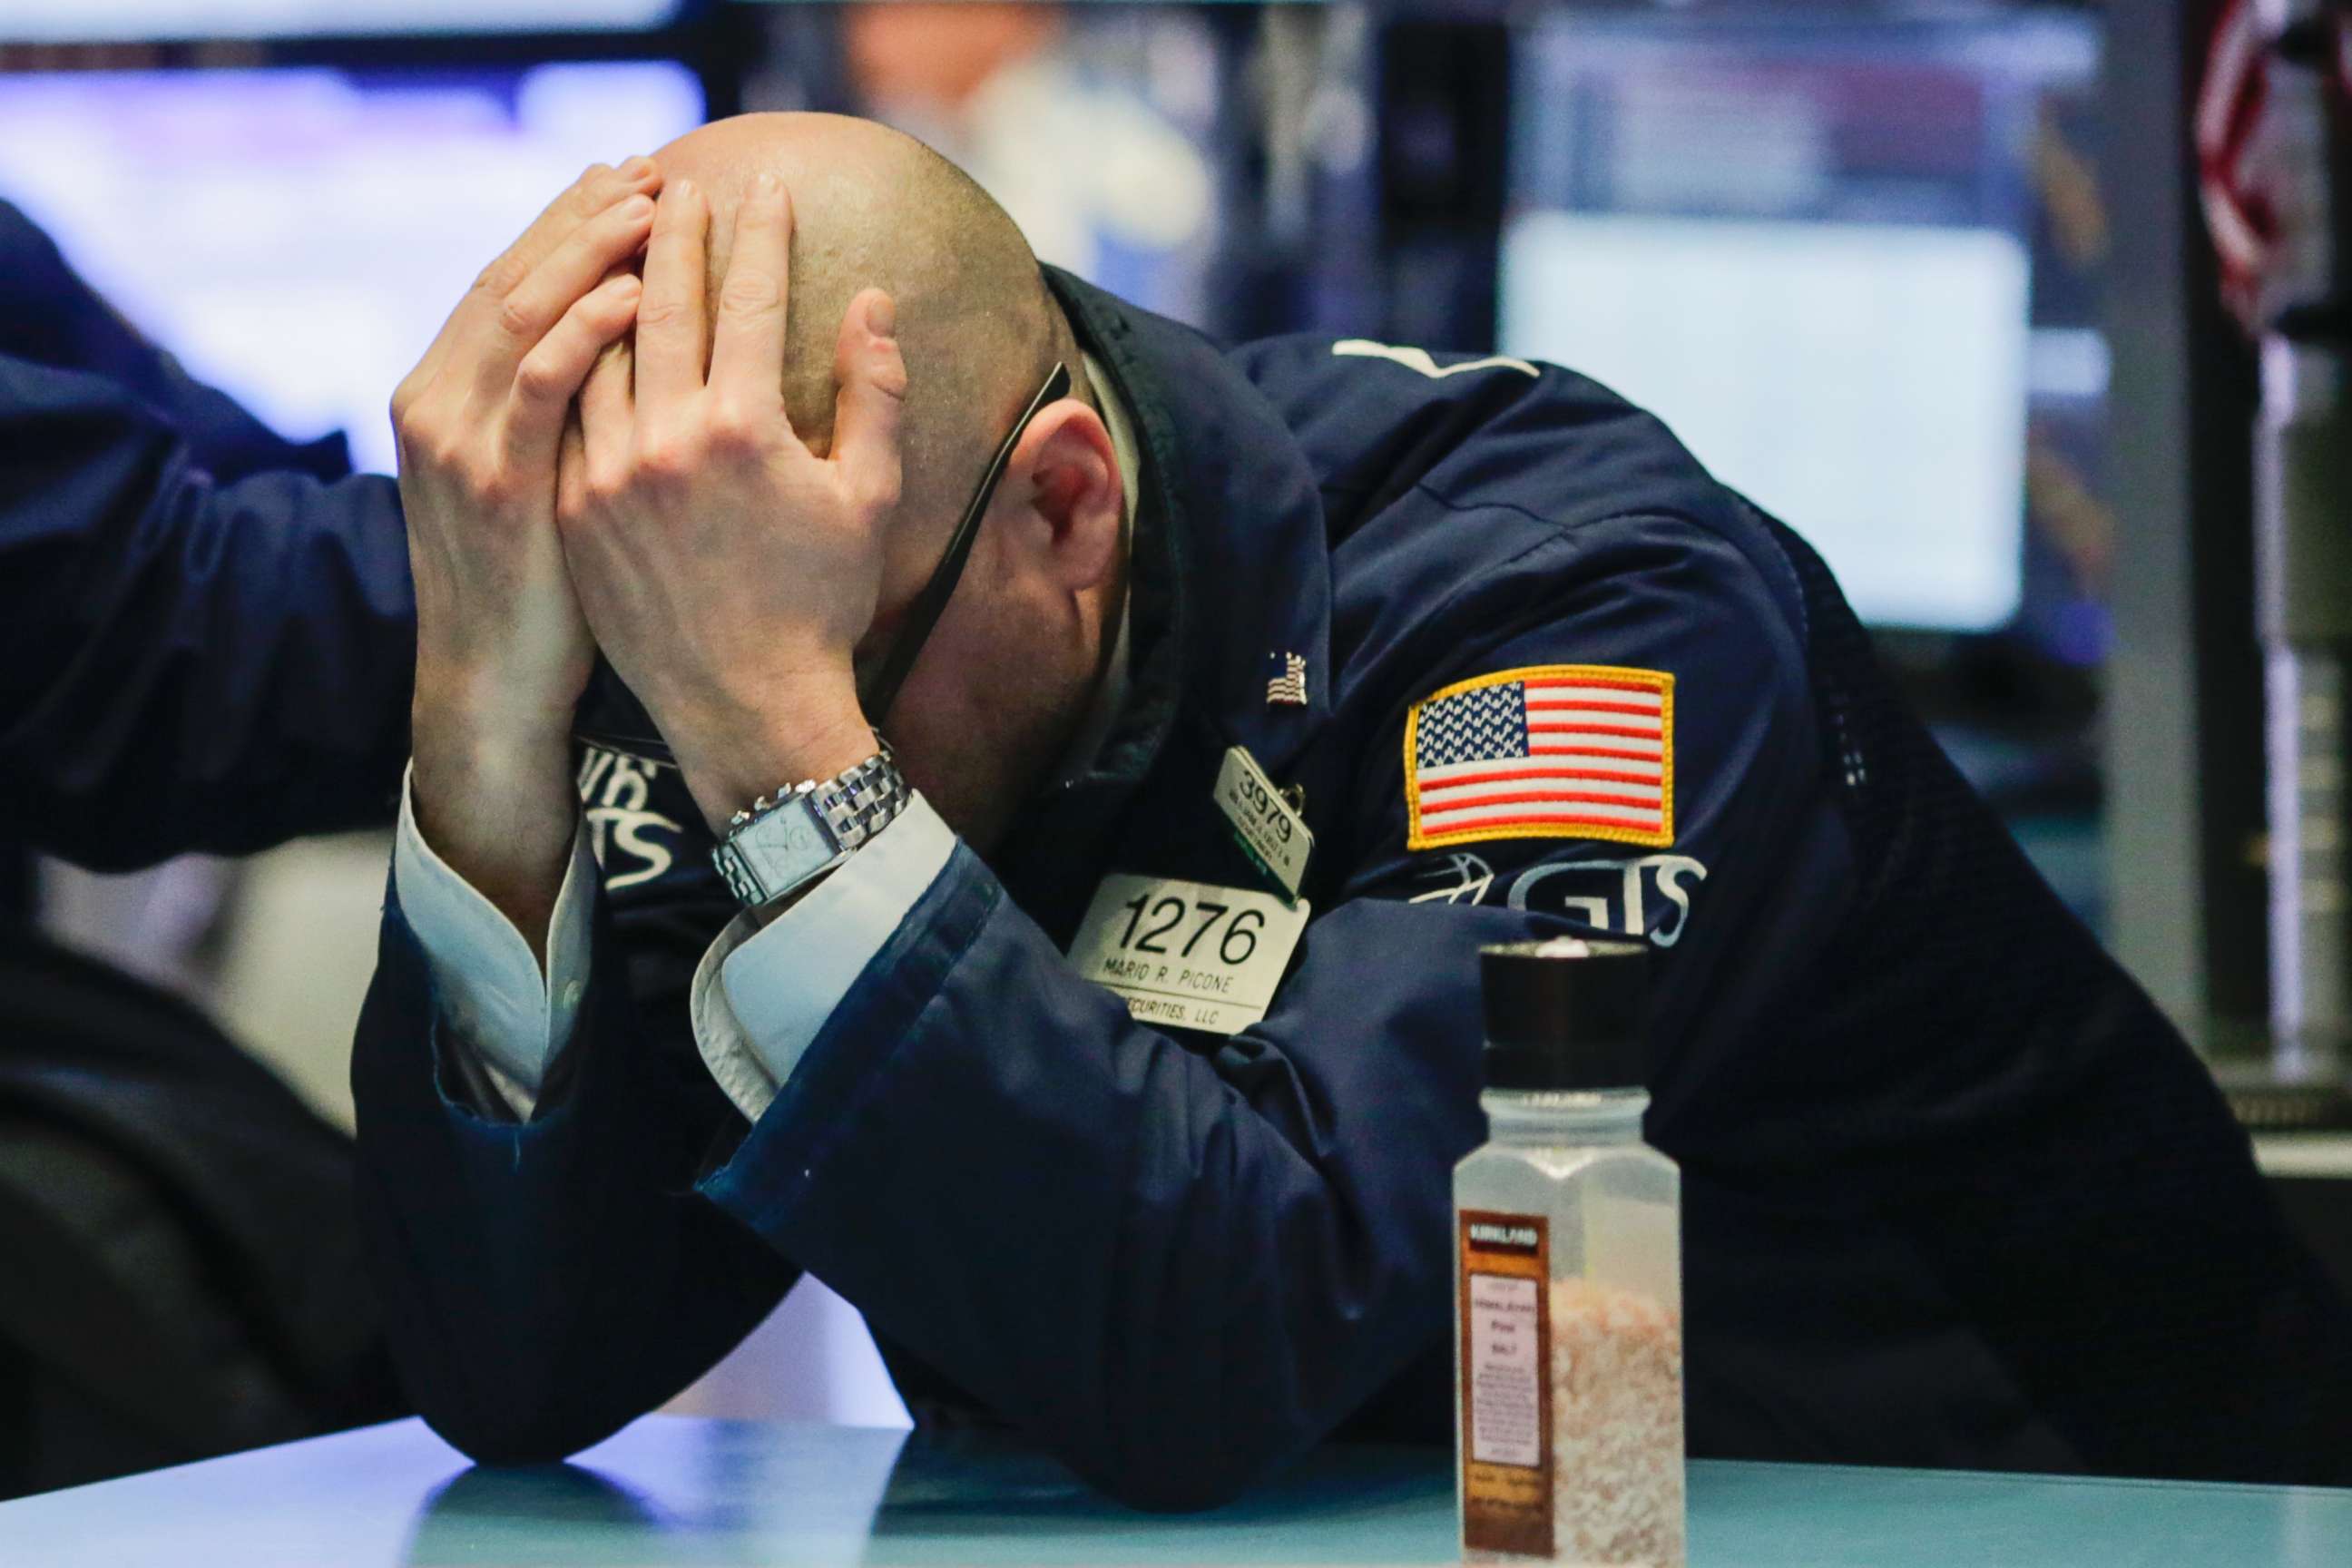 A trader reacts on the floor of the New York Stock Exchange (NYSE) on March 1, 2018, in New York City. Major stock indexes plunged following President Trump's announcement he was imposing a 25 percent tariff on imported steel and 10 percent on aluminum. 